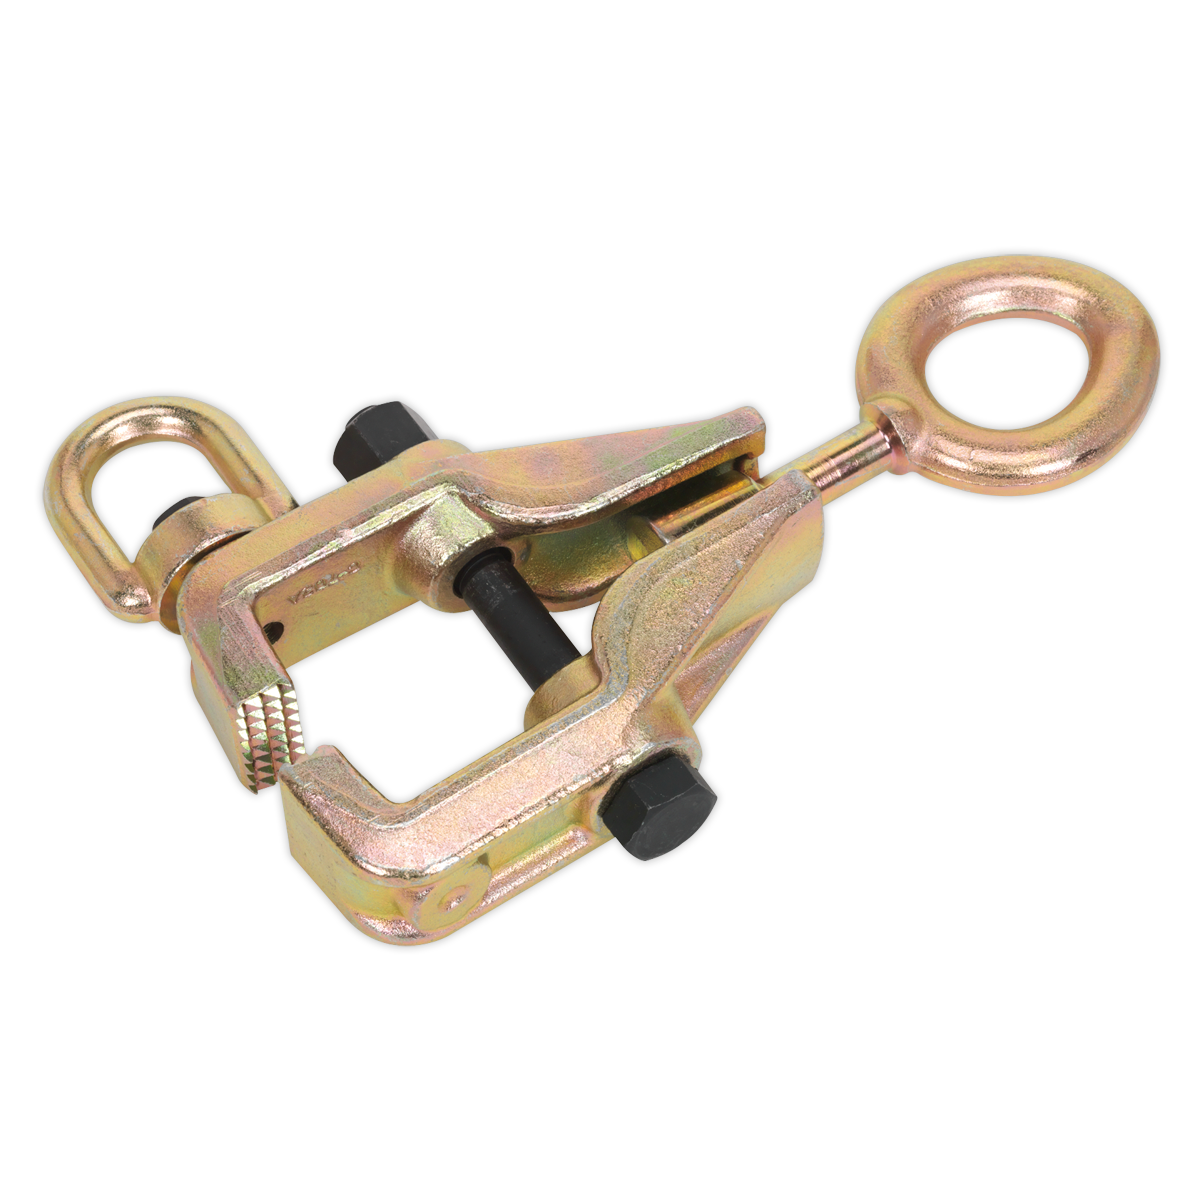 2-Direction Box Pull Clamp 245mm - RE95 - Farming Parts